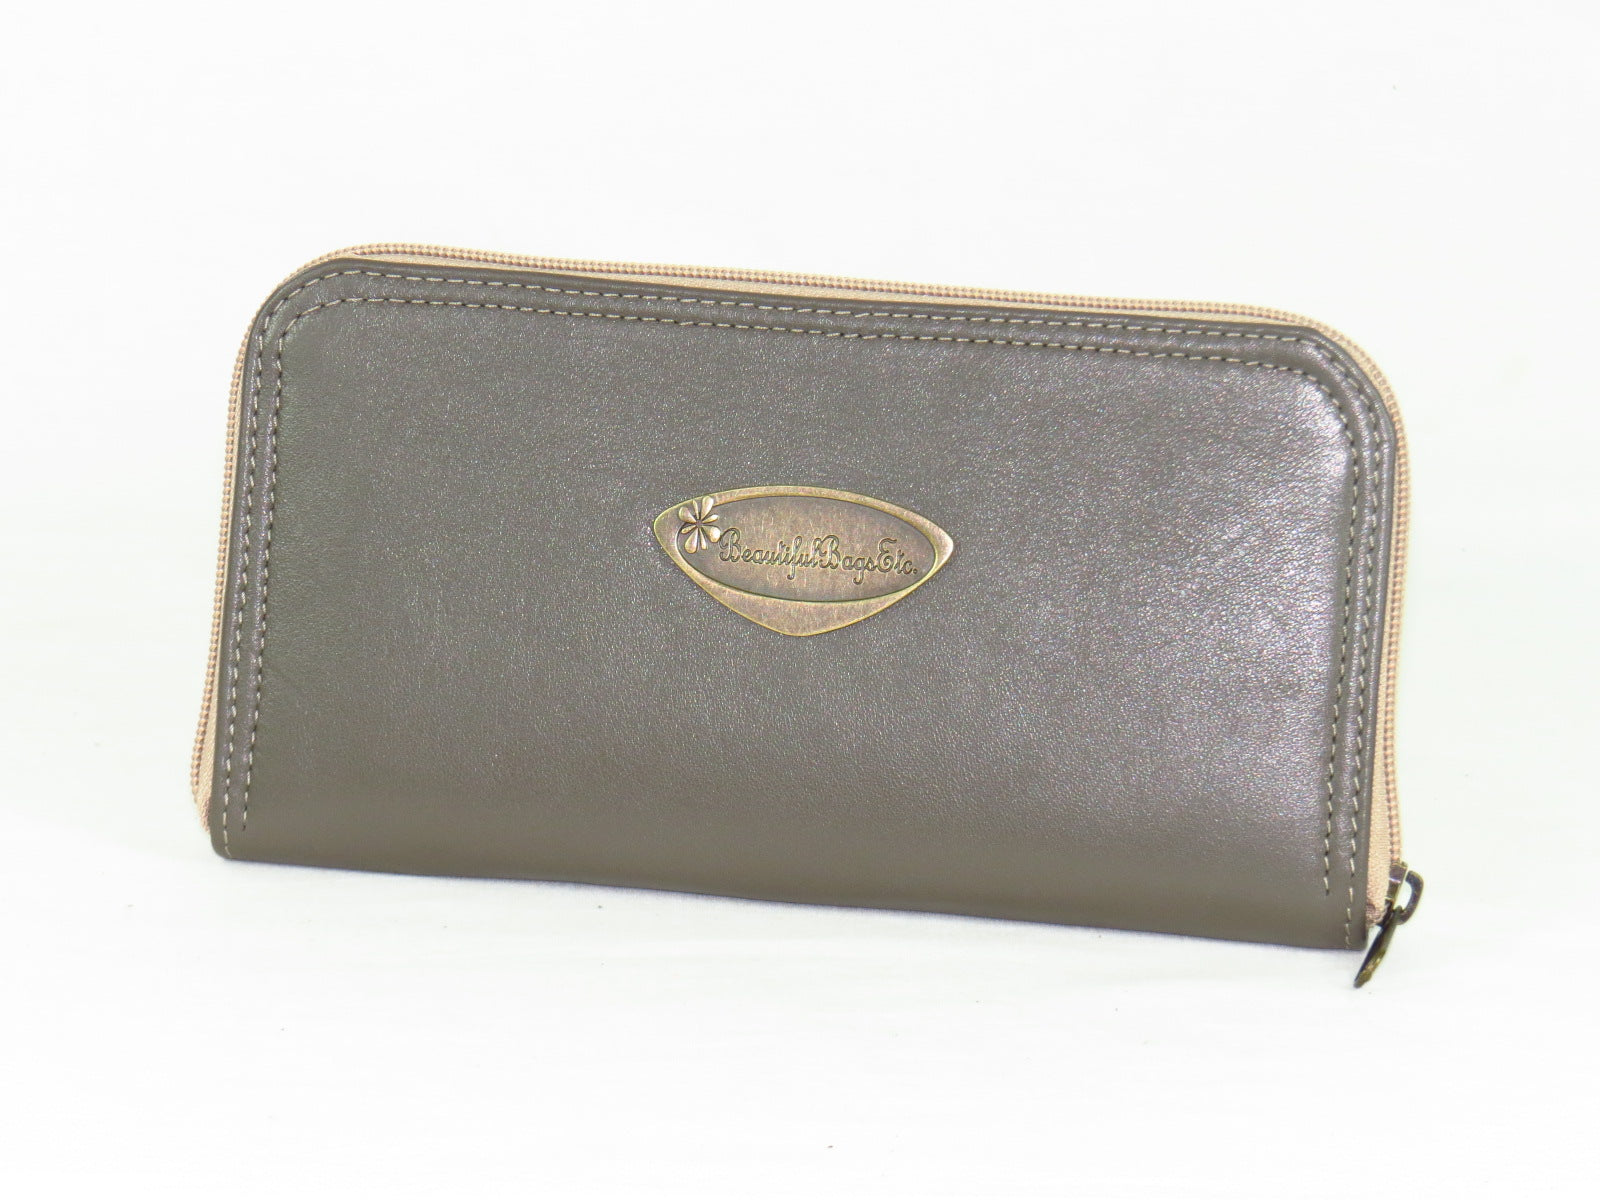 Khaki Gray Tone on Tone Embroidered Leather Wallet reverse side